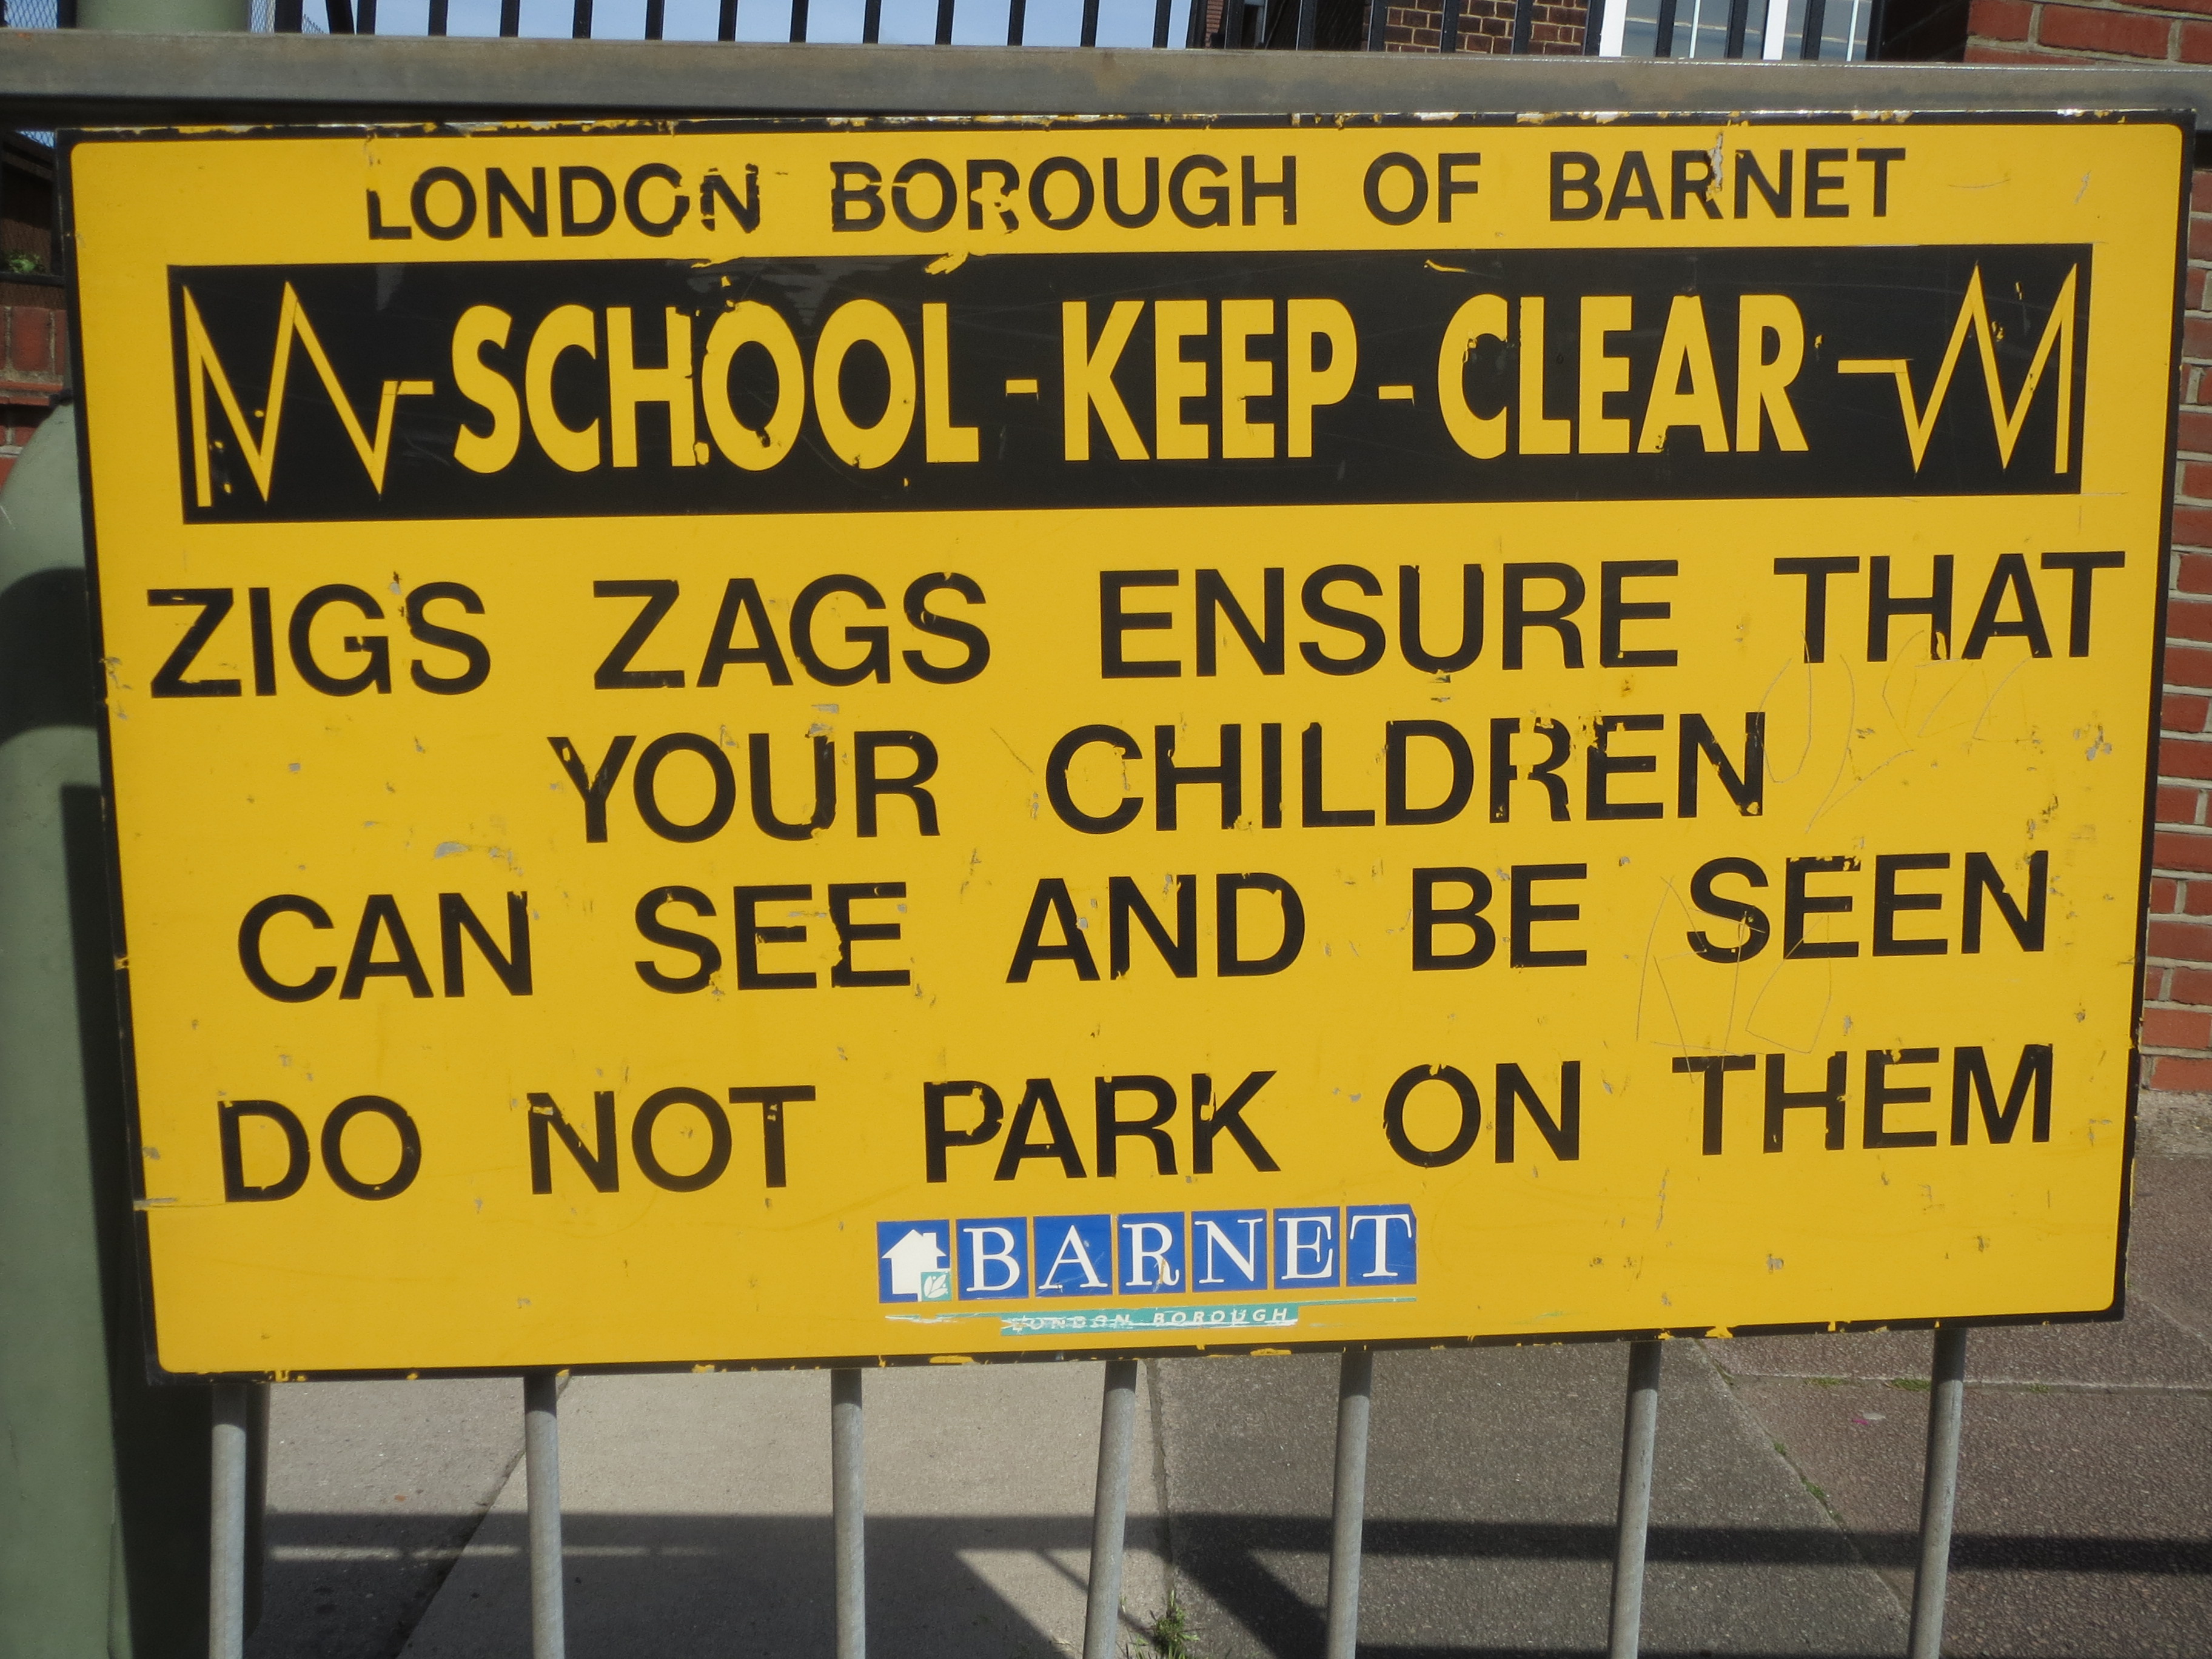 street sign - London Borough Of Barnet MSchoolKeepClearm Zig'S Zags Ensure That Your Children Can See And Be Seen Do Not Park On Them Barnet